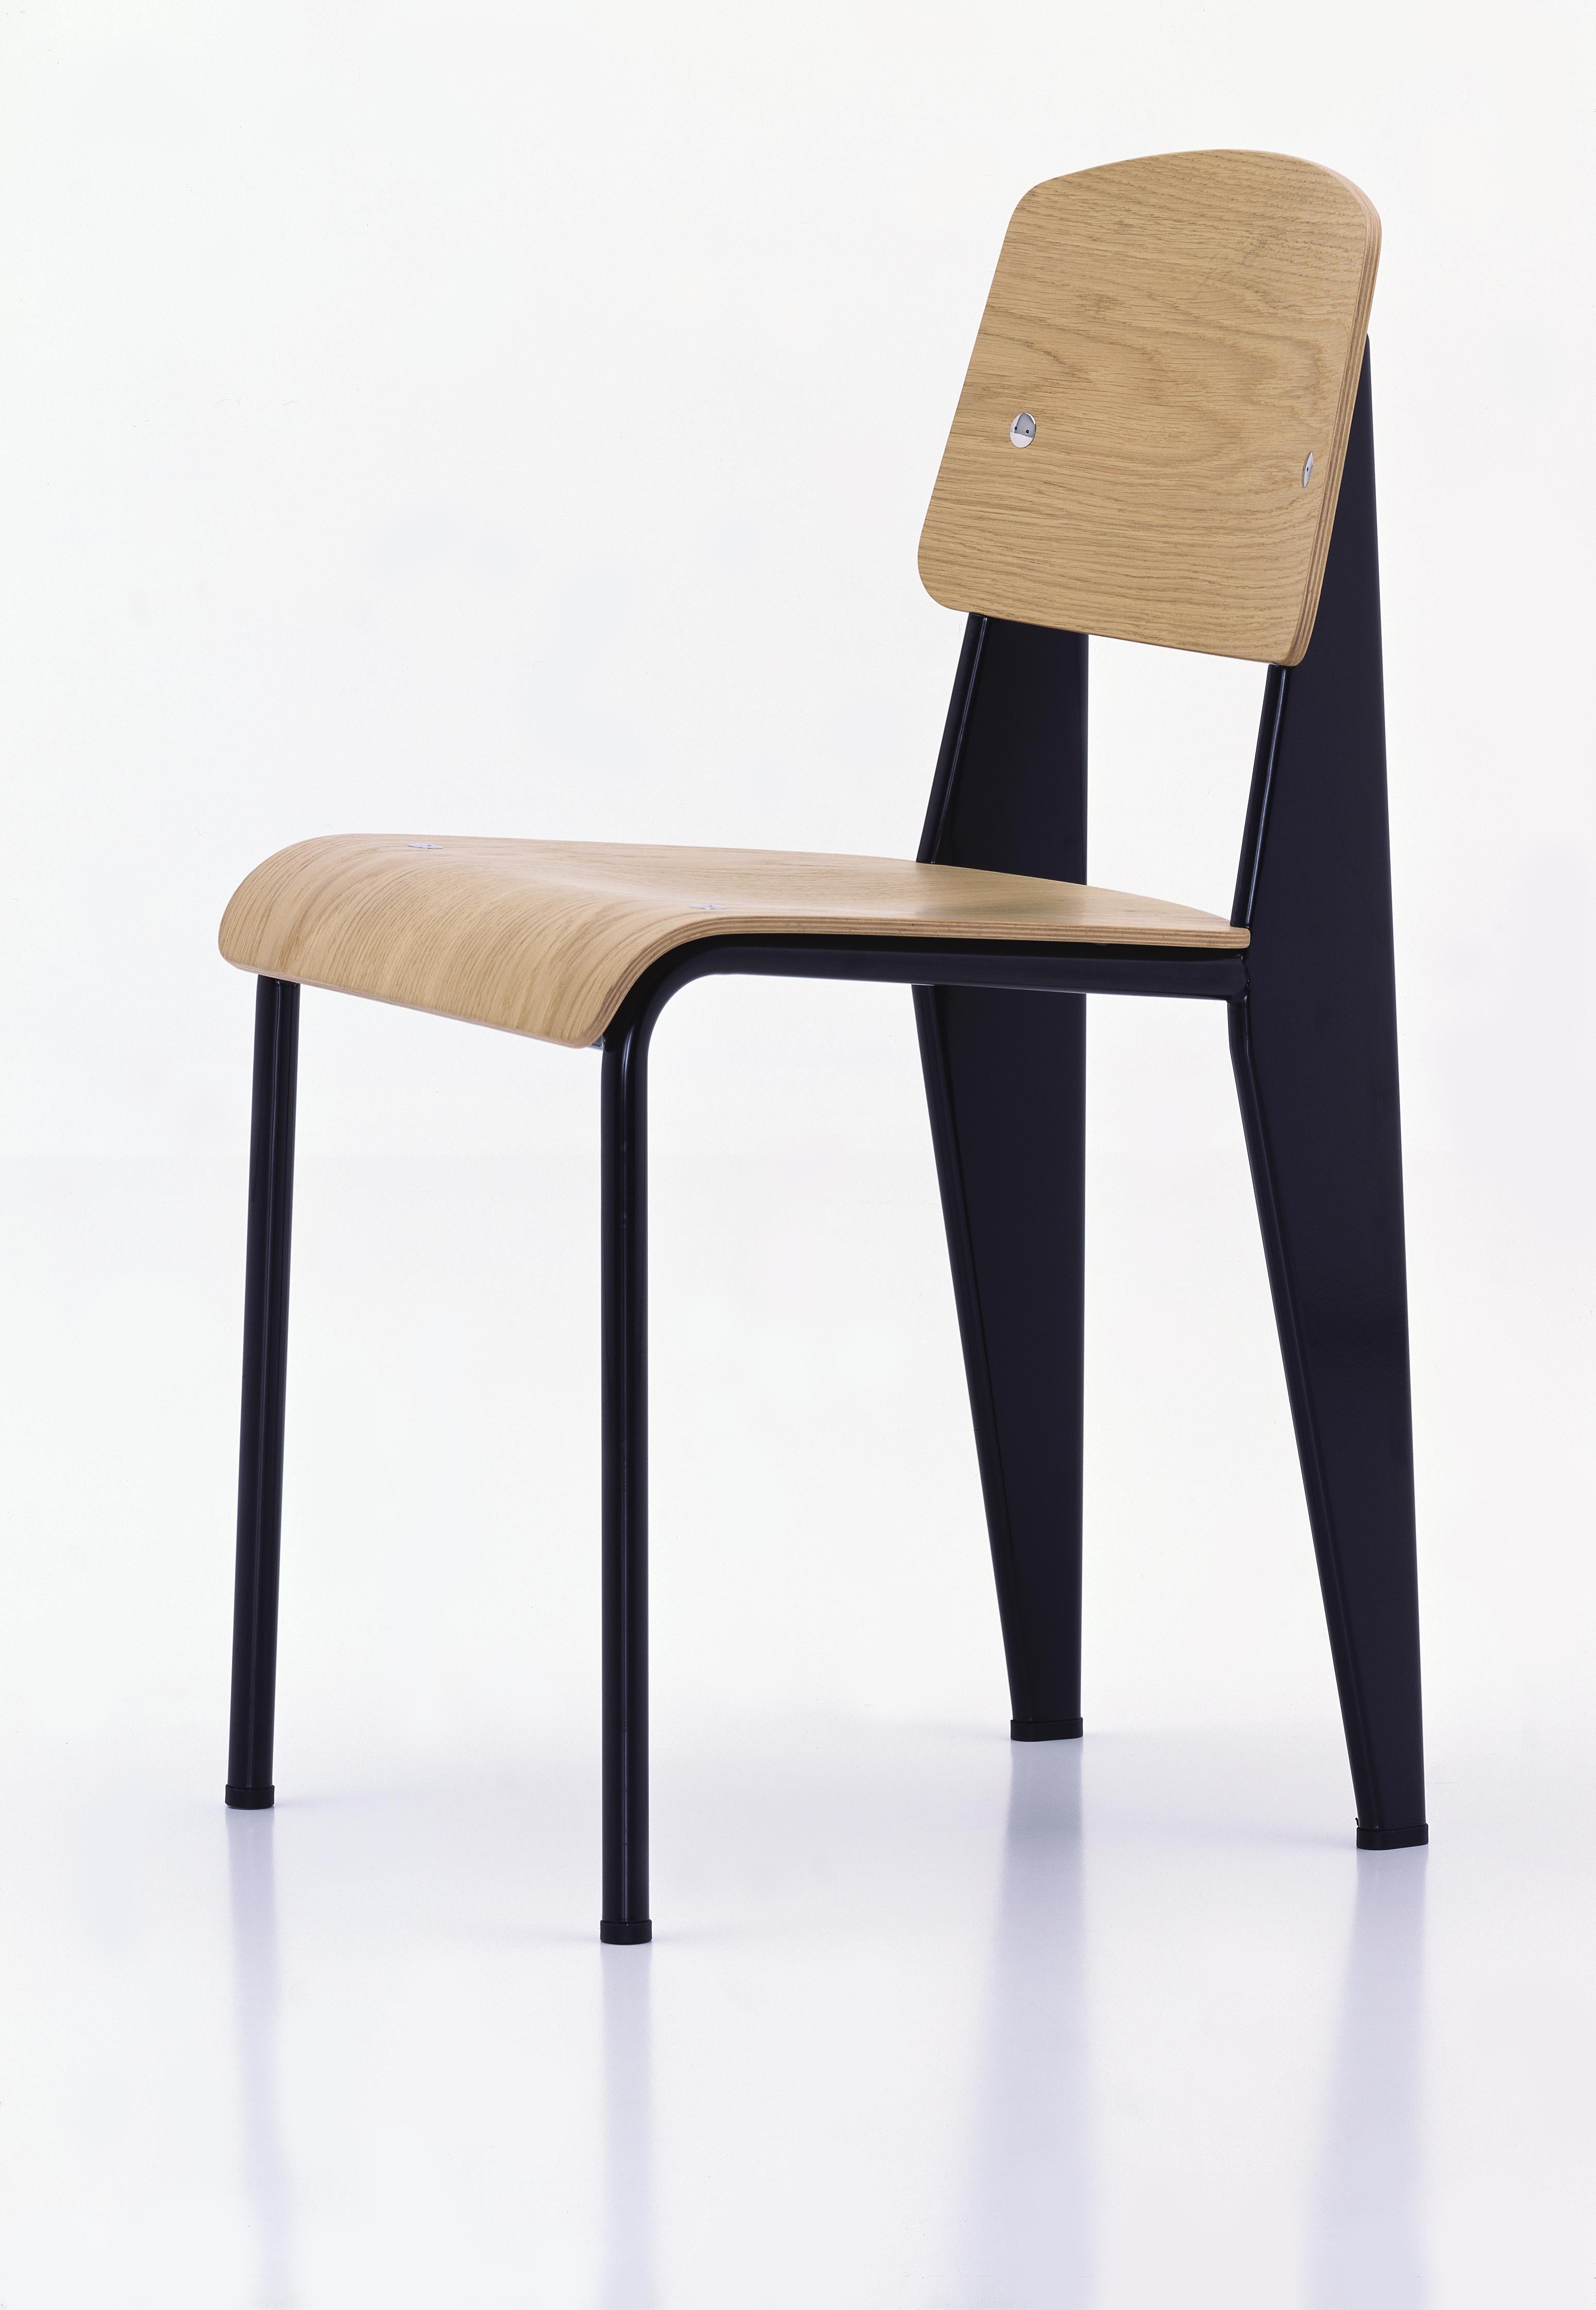 Steel Jean Prouvé Standard Chair in Dark Oak and Black Metal for Vitra